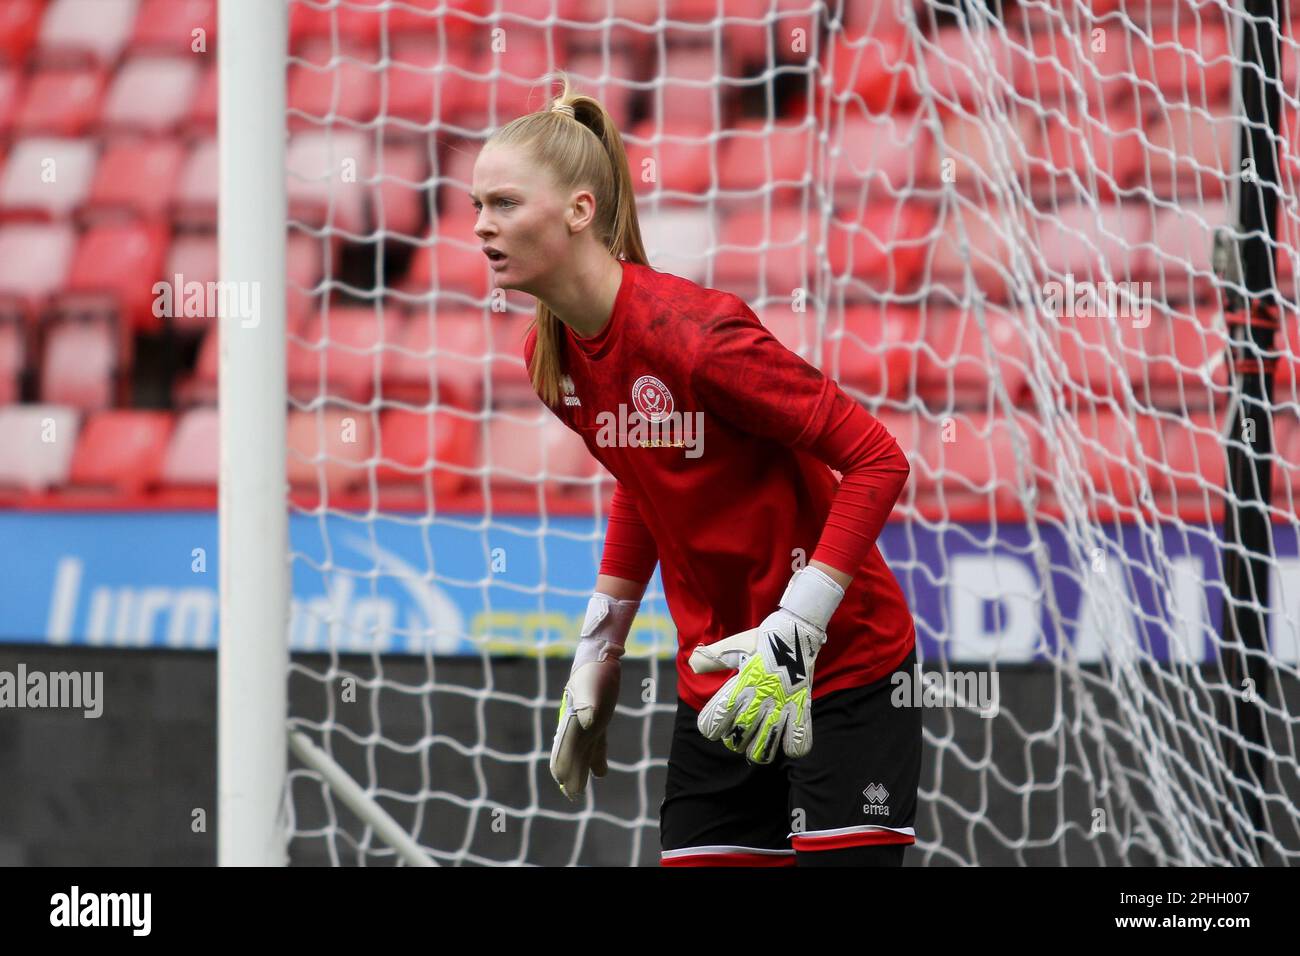 Sheffield, UK. 26th Mar, 2023. Sheffield, England, March 26th 2023; Fran Stenson During the Warm up before FA Women's Championship - Sheffield United v Lewes at Bramall Lane, Sheffield, England. (Sean Chandler/SPP) Credit: SPP Sport Press Photo. /Alamy Live News Stock Photo